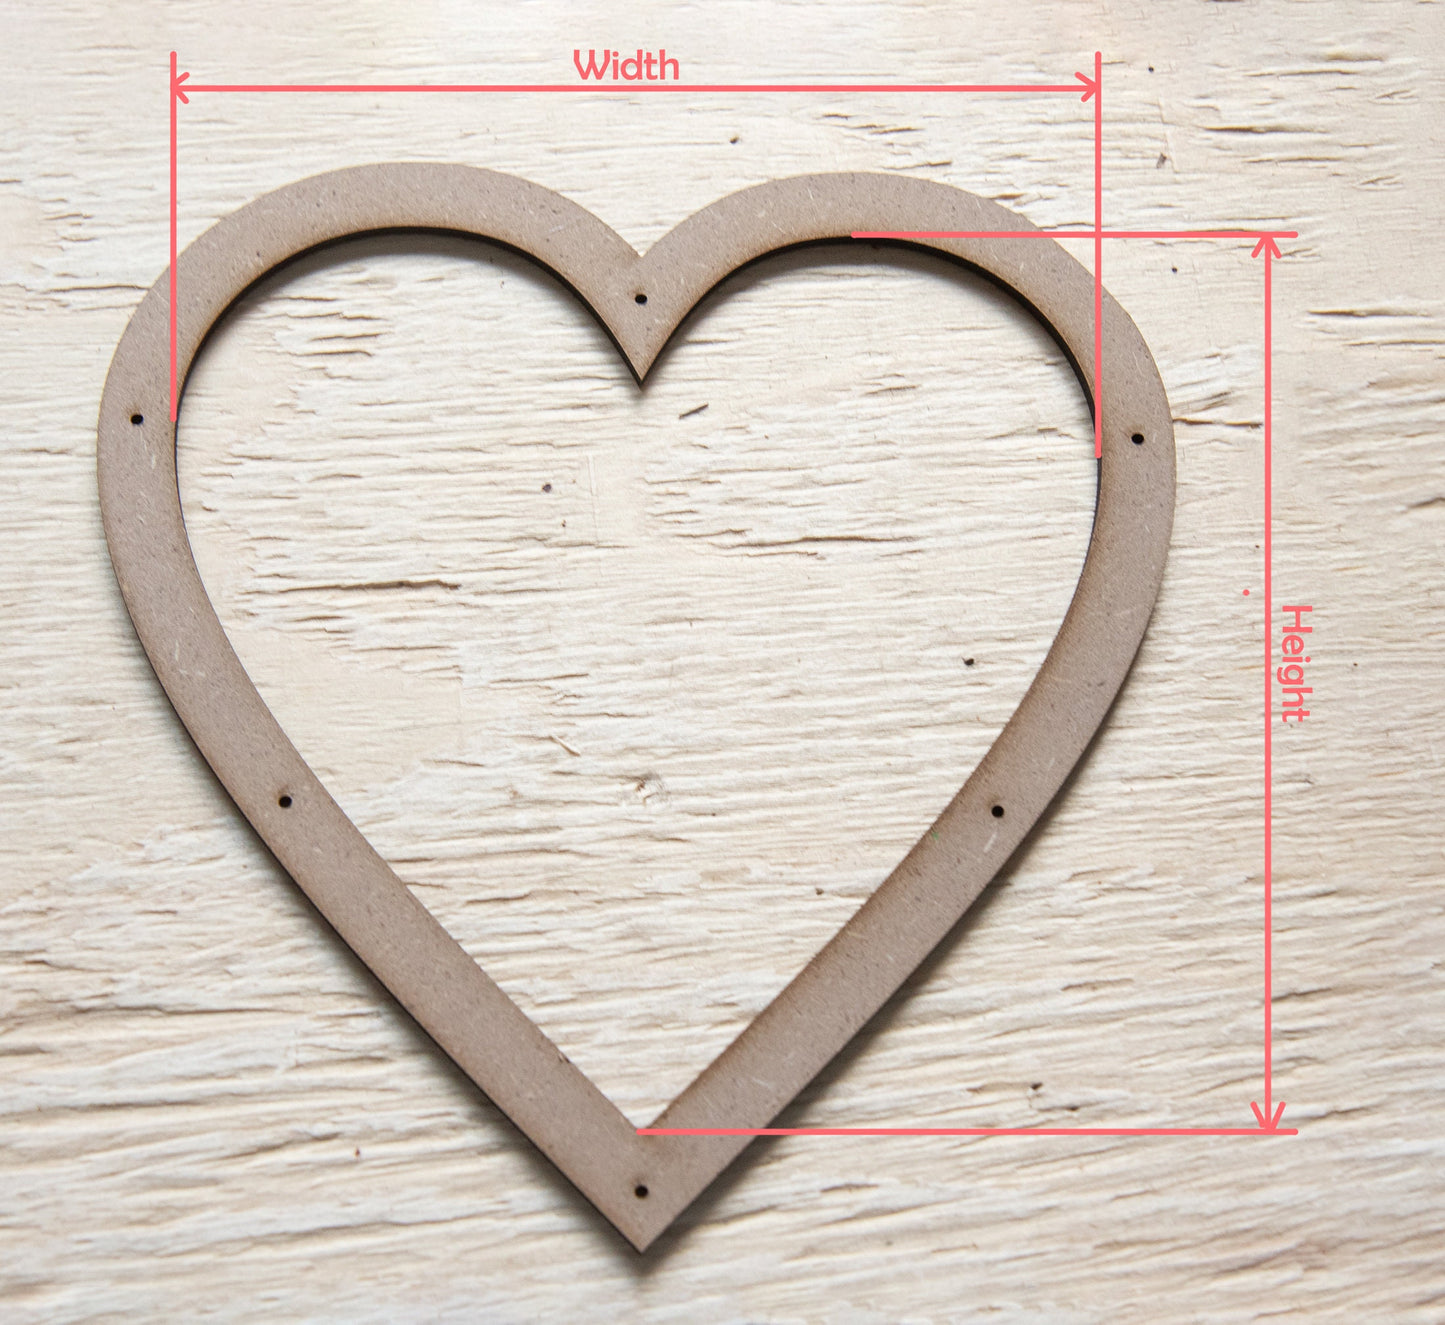 Glassola Tools Heart-shaped Layout Frame, with Measurements